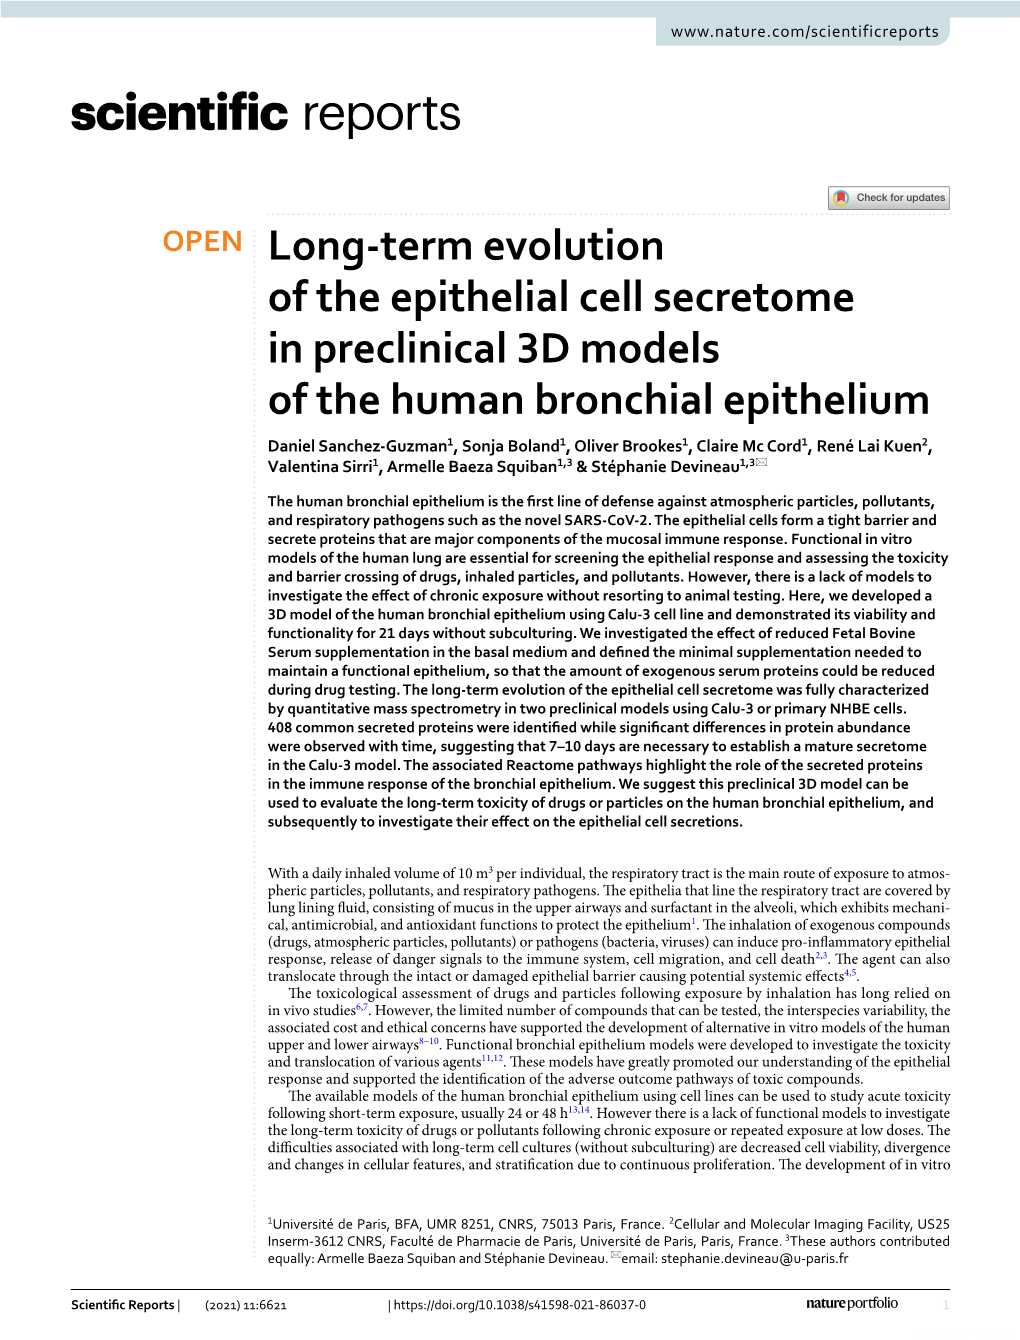 Long-Term Evolution of the Epithelial Cell Secretome in Preclinical 3D